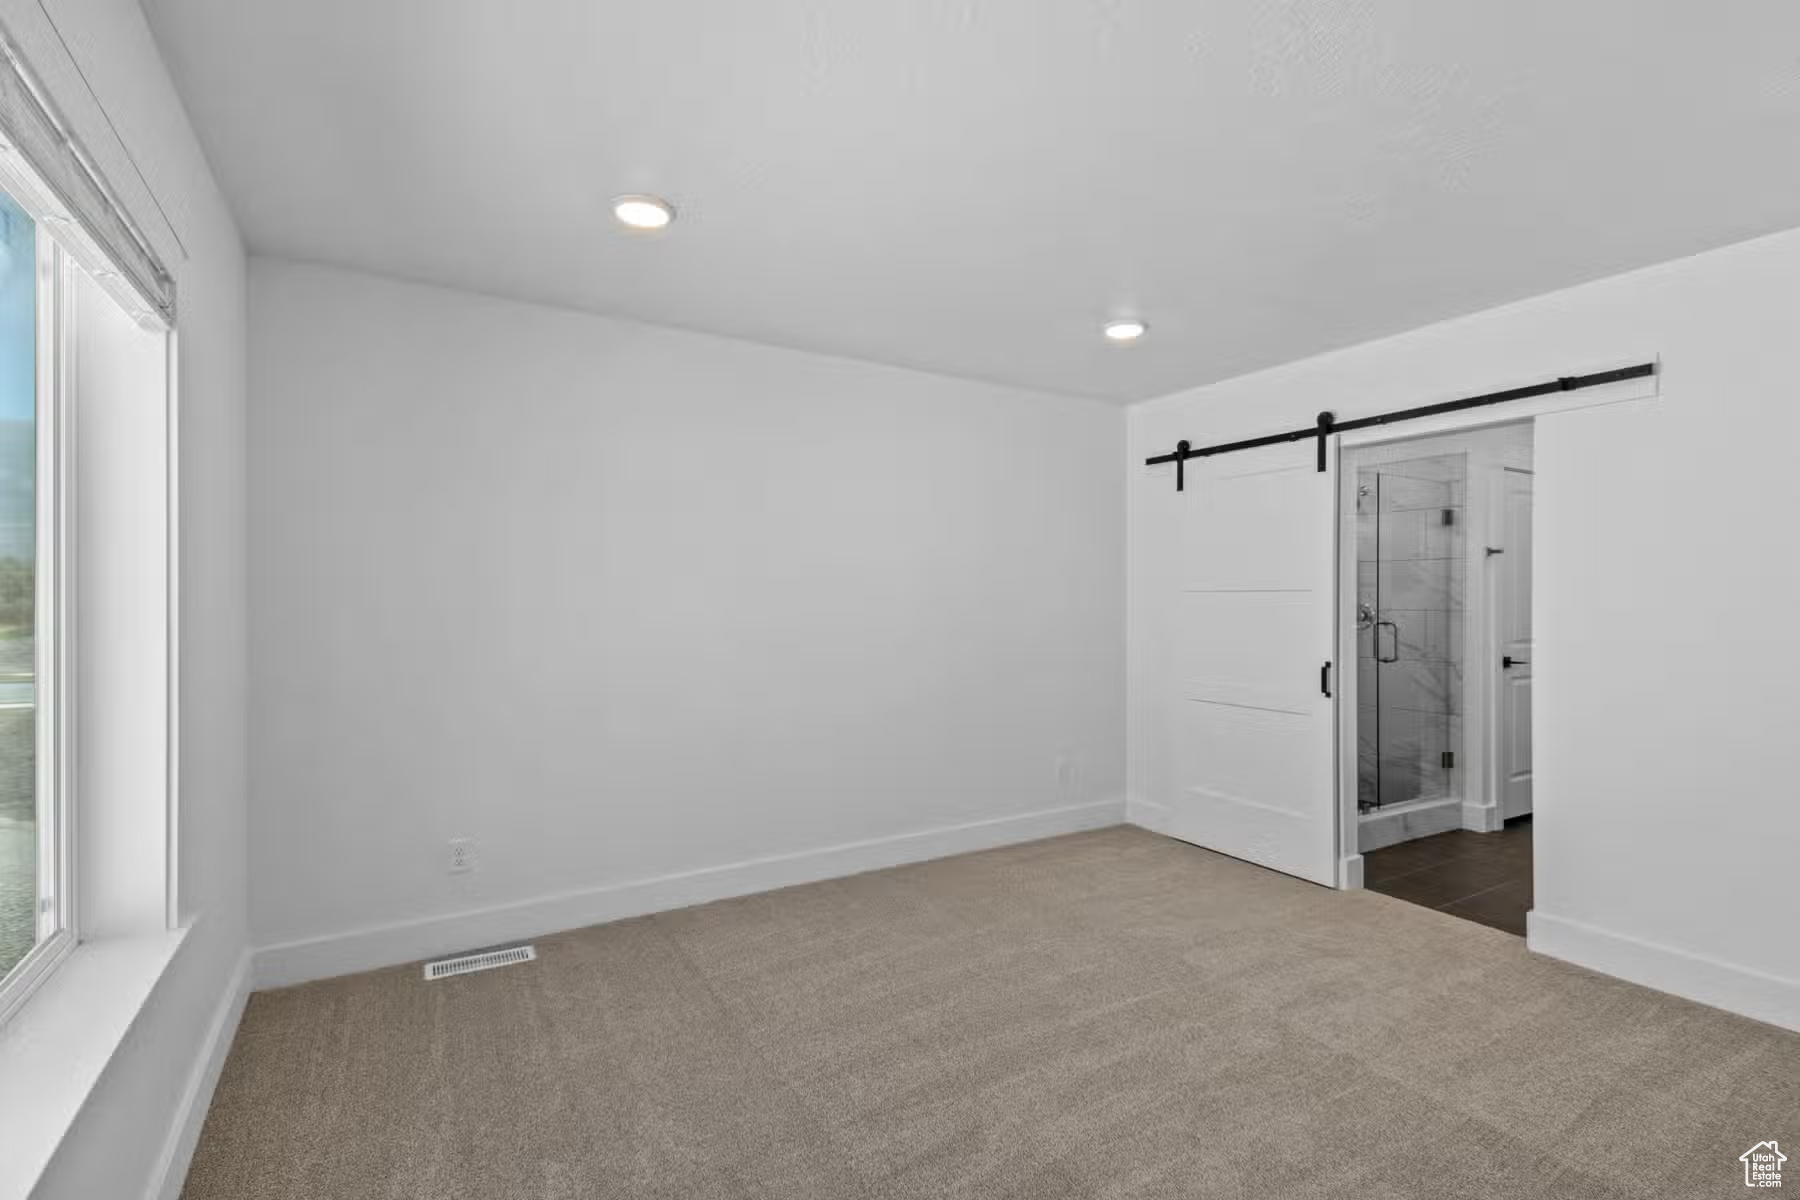 Unfurnished bedroom featuring ensuite bath, a barn door, and dark colored carpet